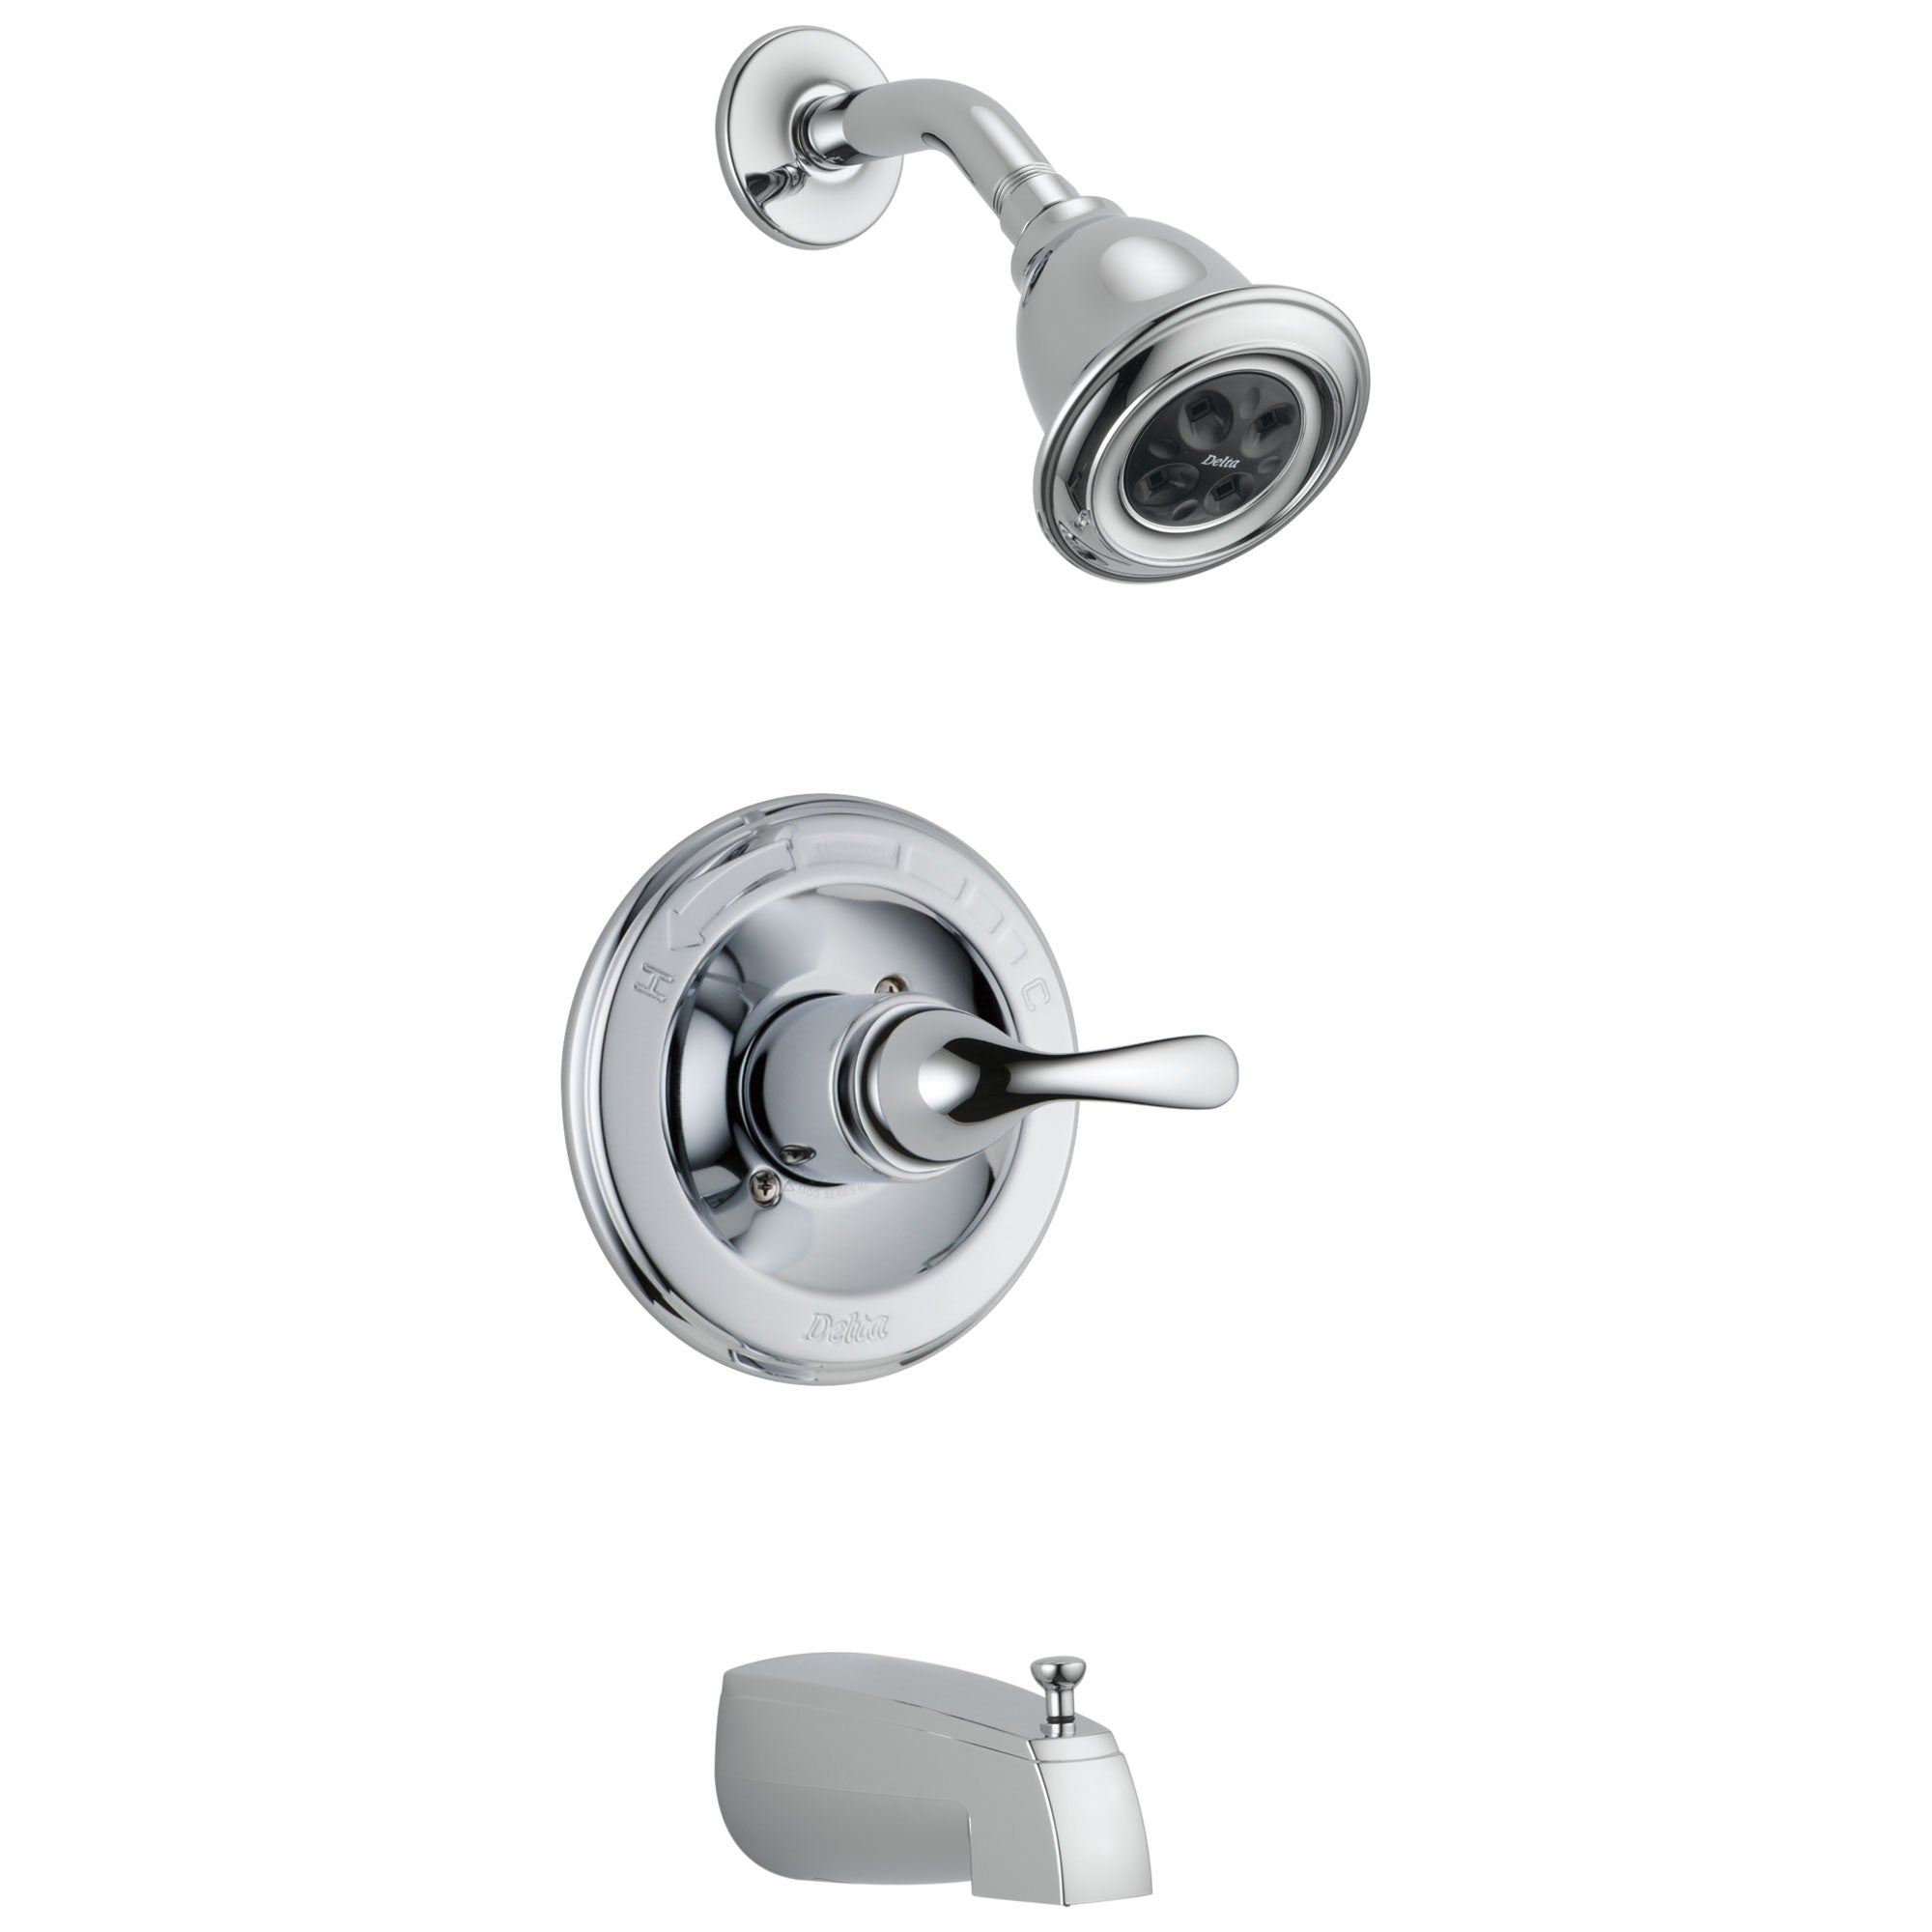 Delta Chrome Finish Monitor 13 Series H2Okinetic Watersense Single Lever Tub / Shower Combo Includes Rough-in Valve without Stops D2523V